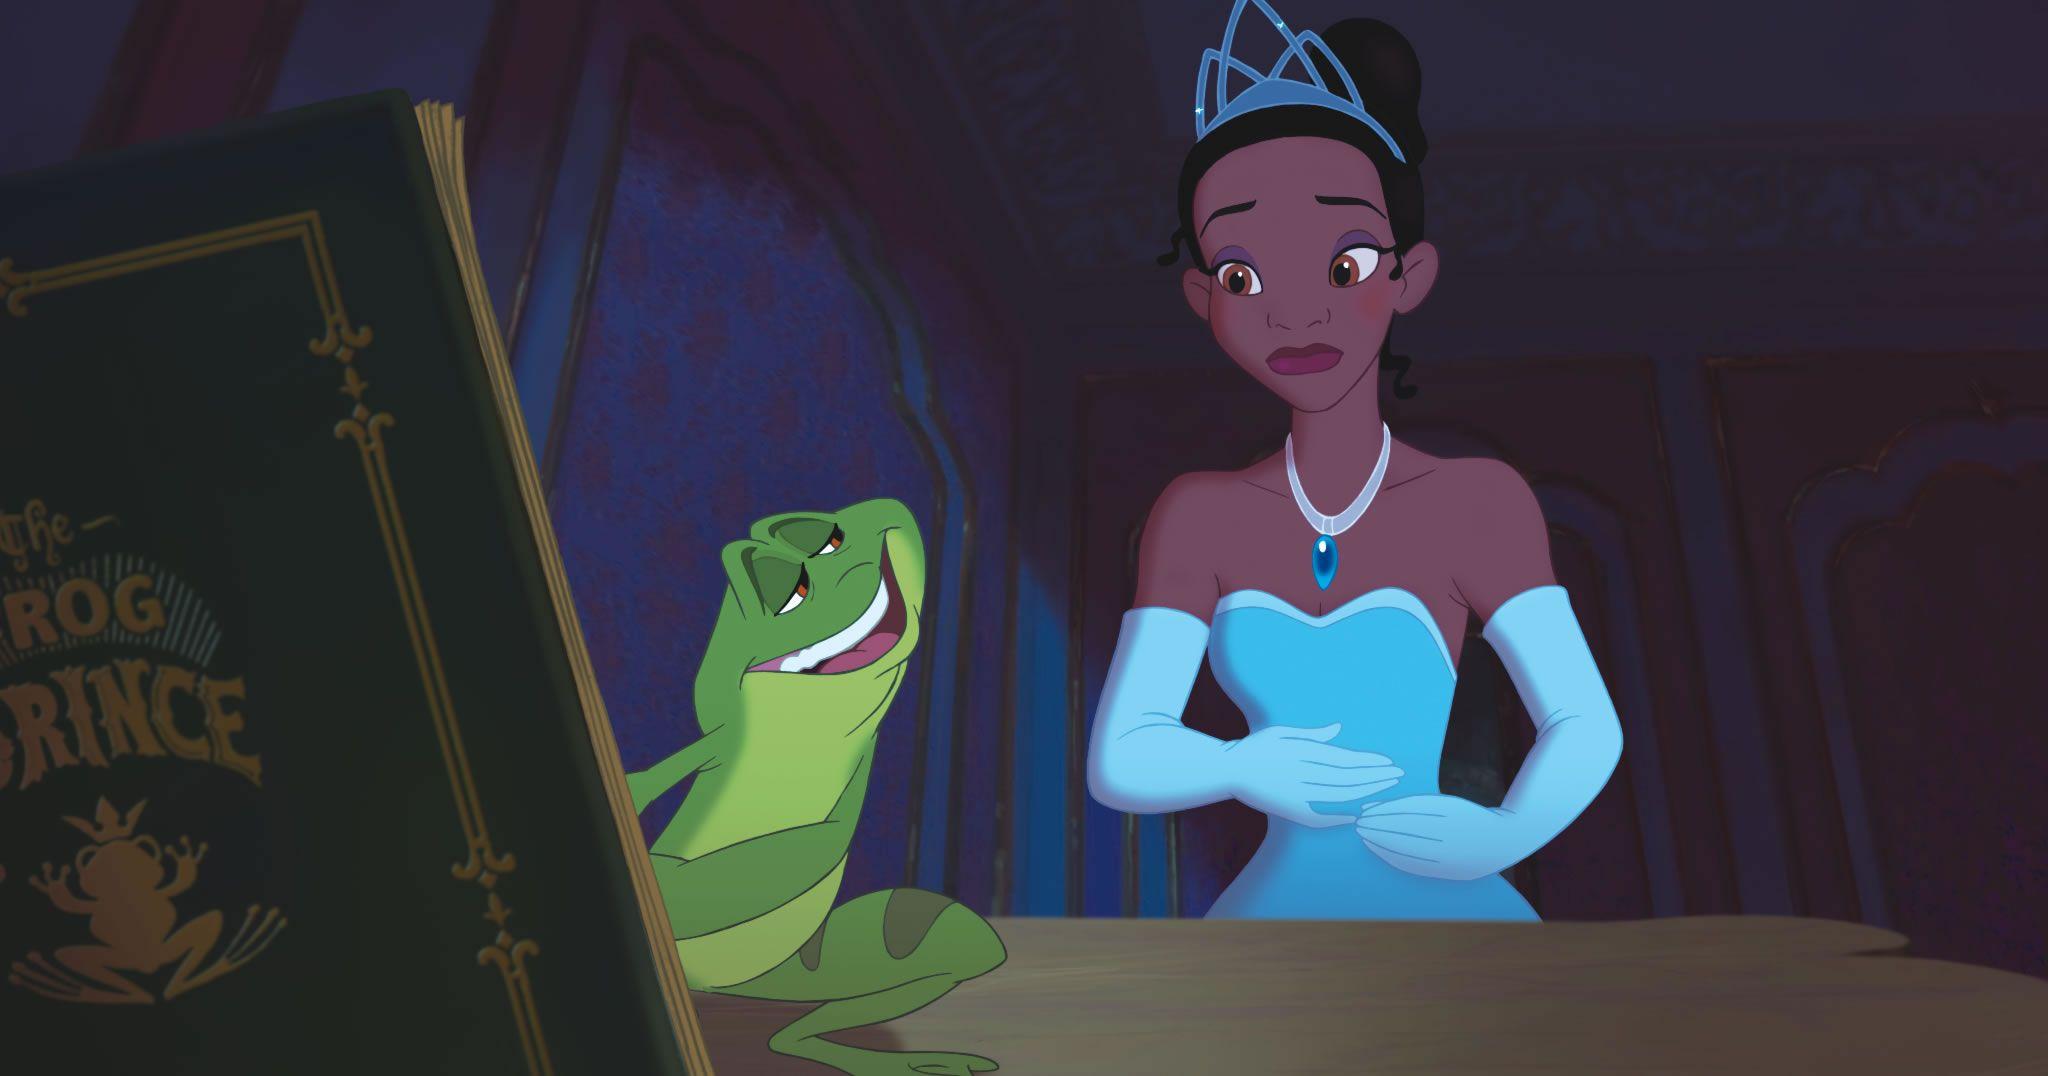 Prince Naveen and Tiana from Disney's Princess and the Frog